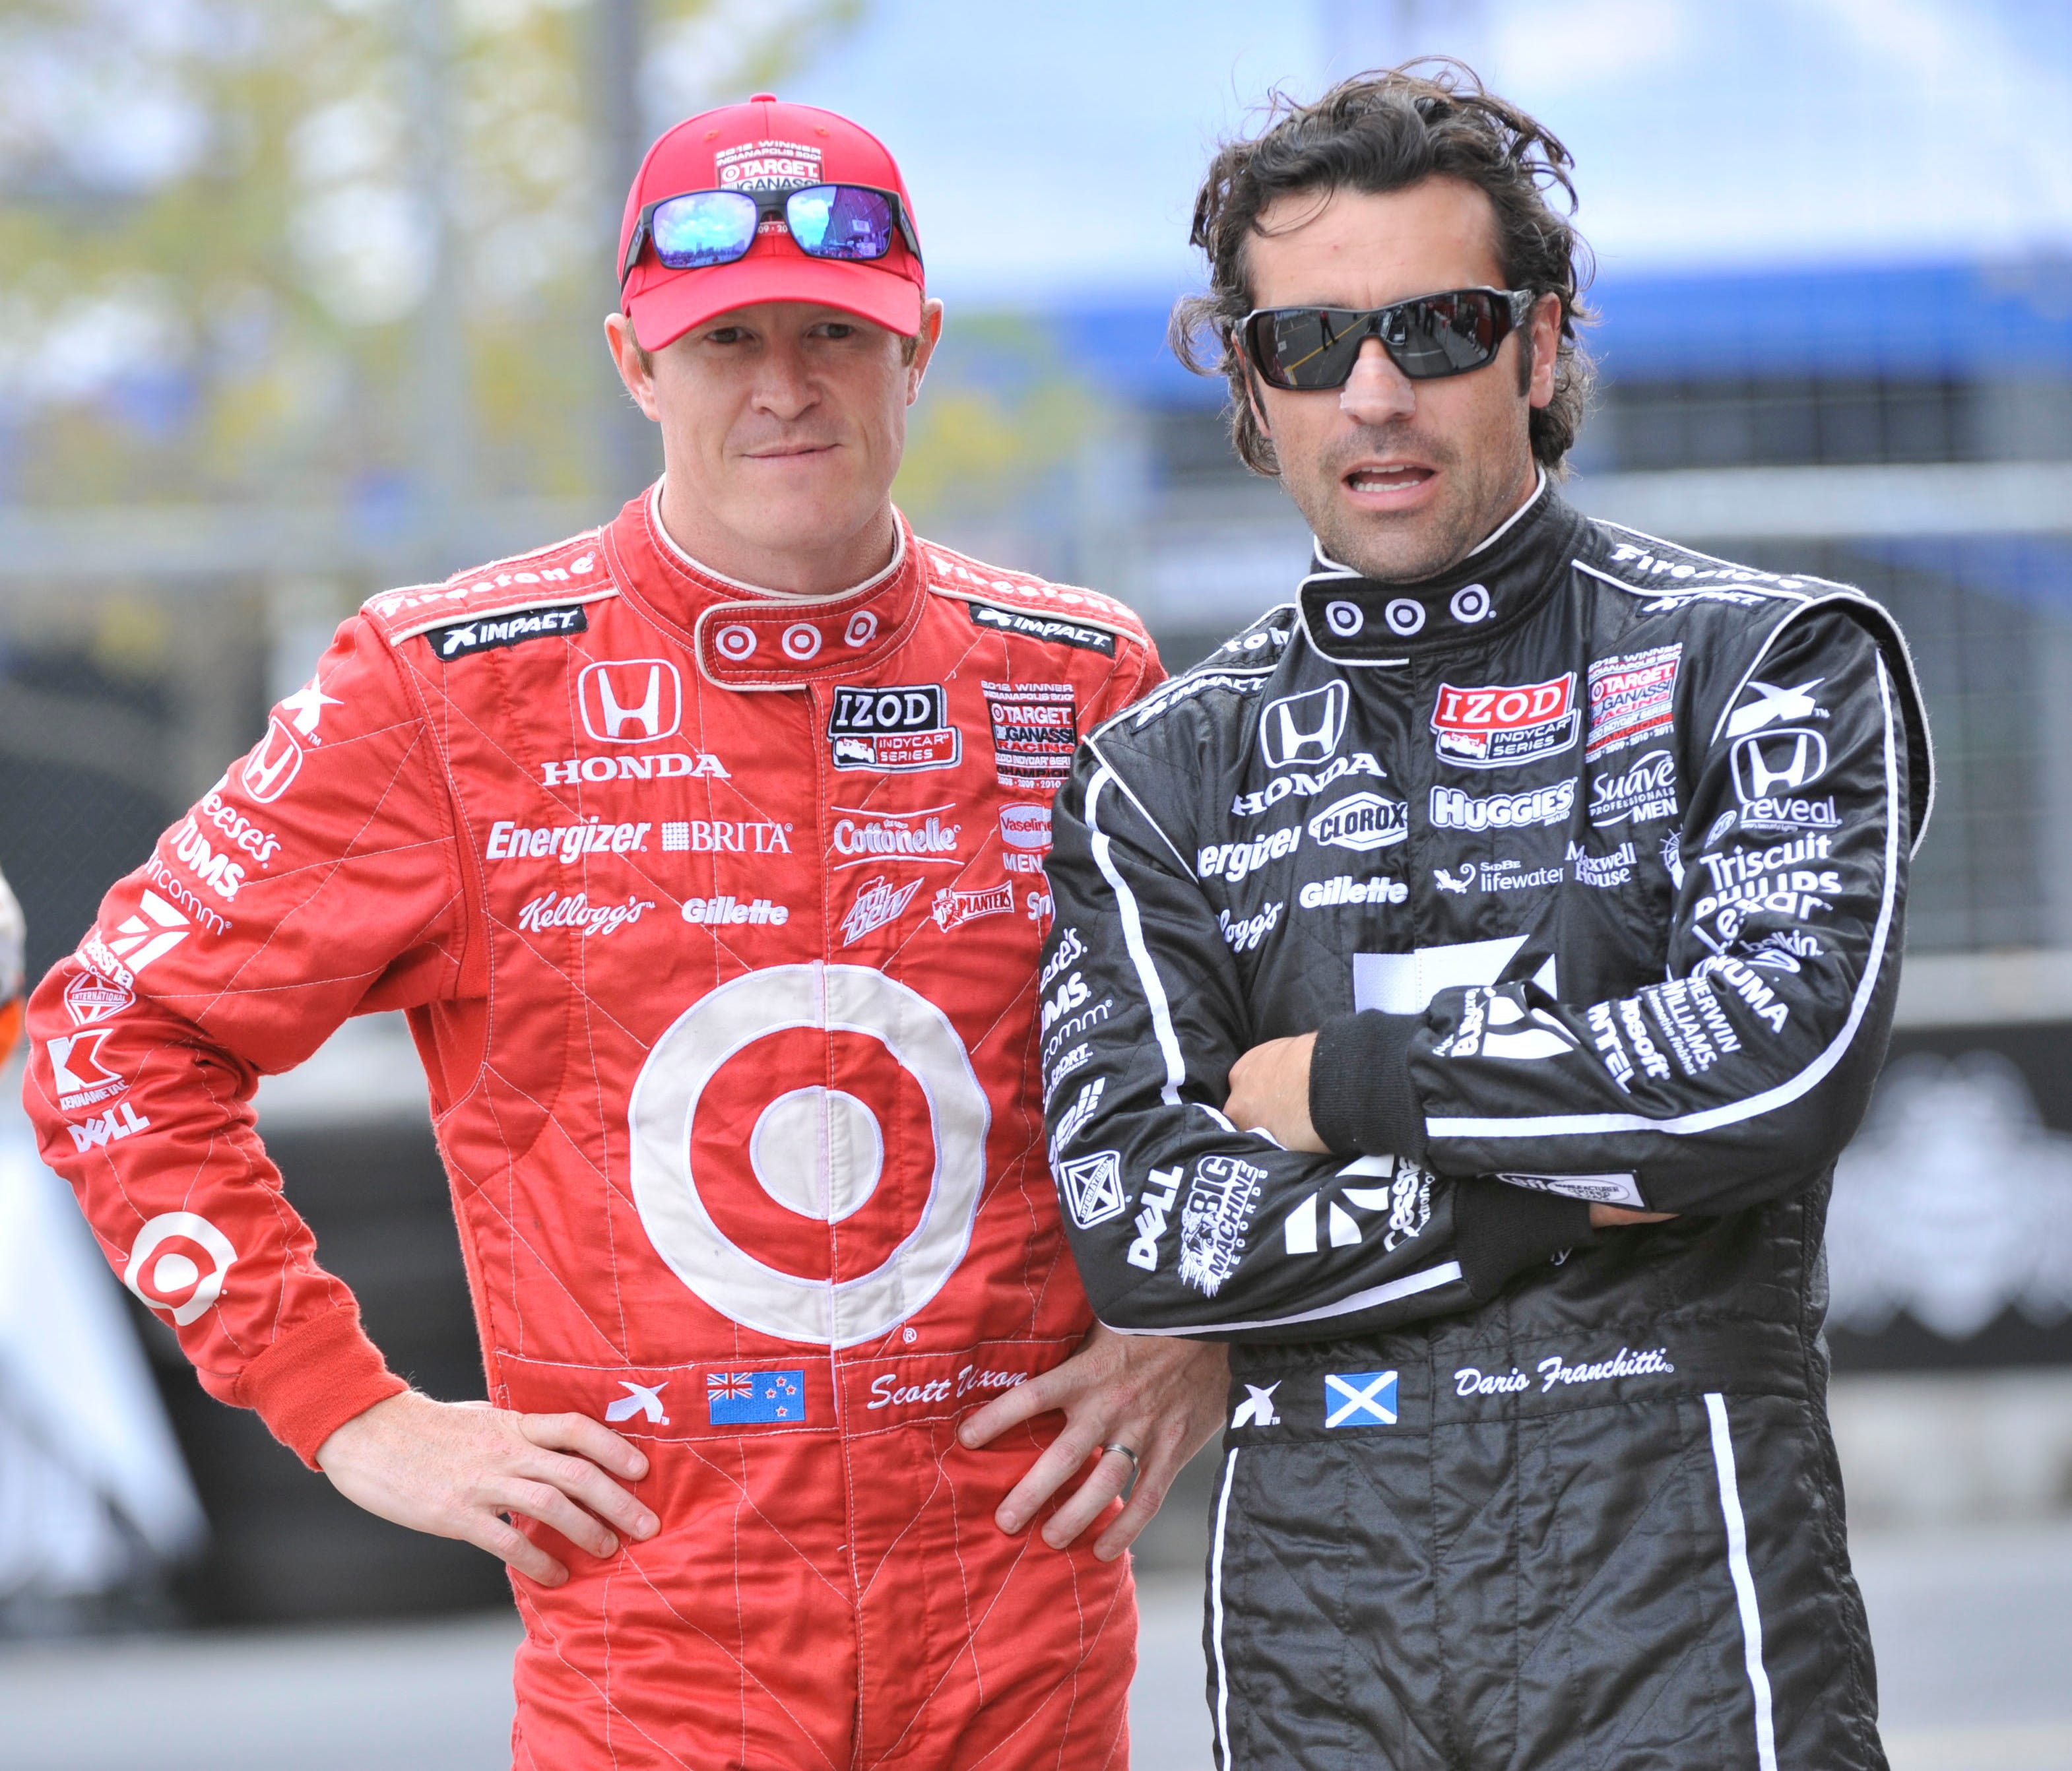 IndyCar Series drivers Scott Dixon, left, and Dario Franchitti talk in the pits during practice for the Grand Prix of Baltimore in 2013.